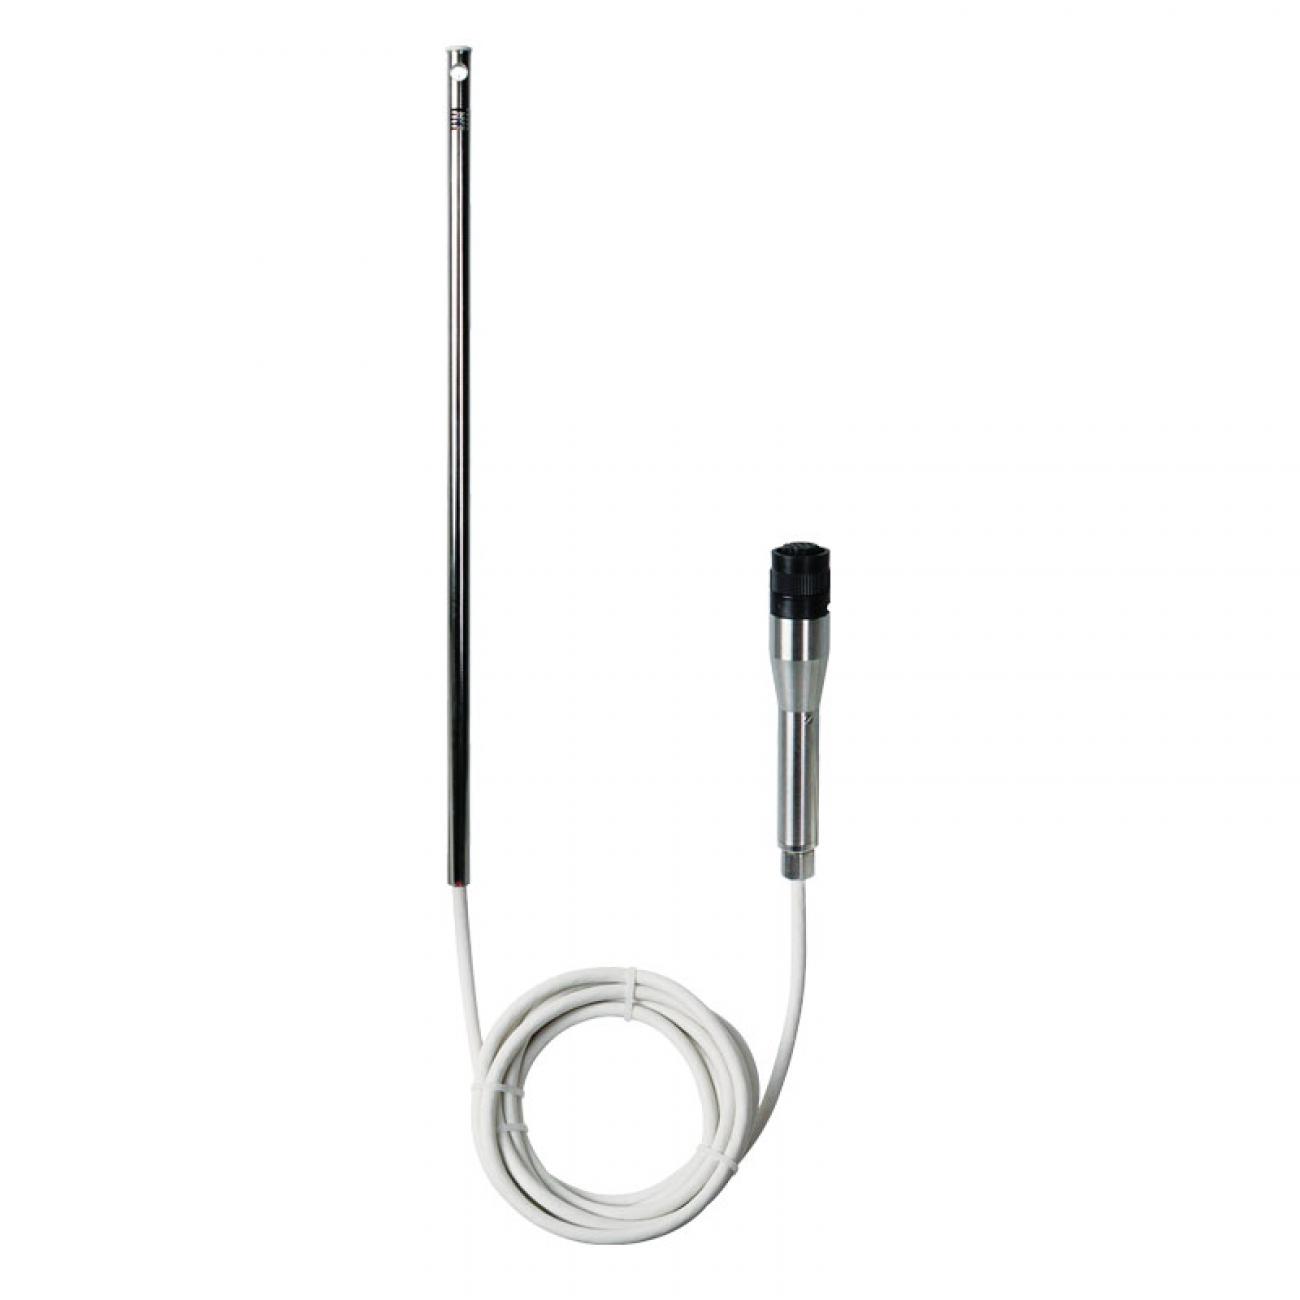 Air velocity hot wire probe For class 310 sensors